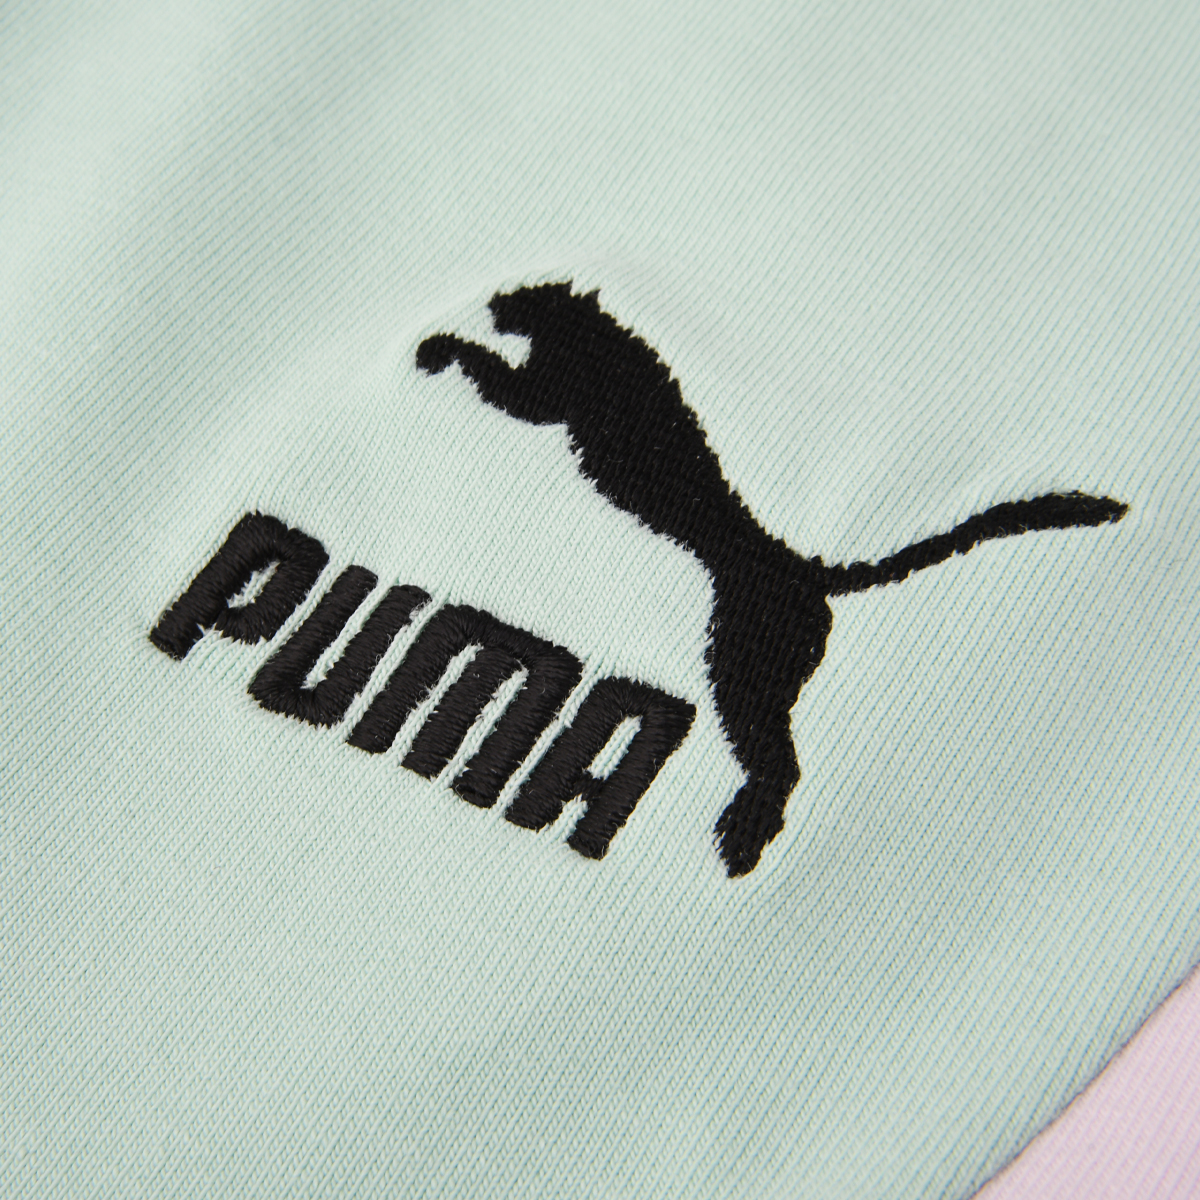 Calza Entrenamiento Puma Swxp Mujer,  image number null